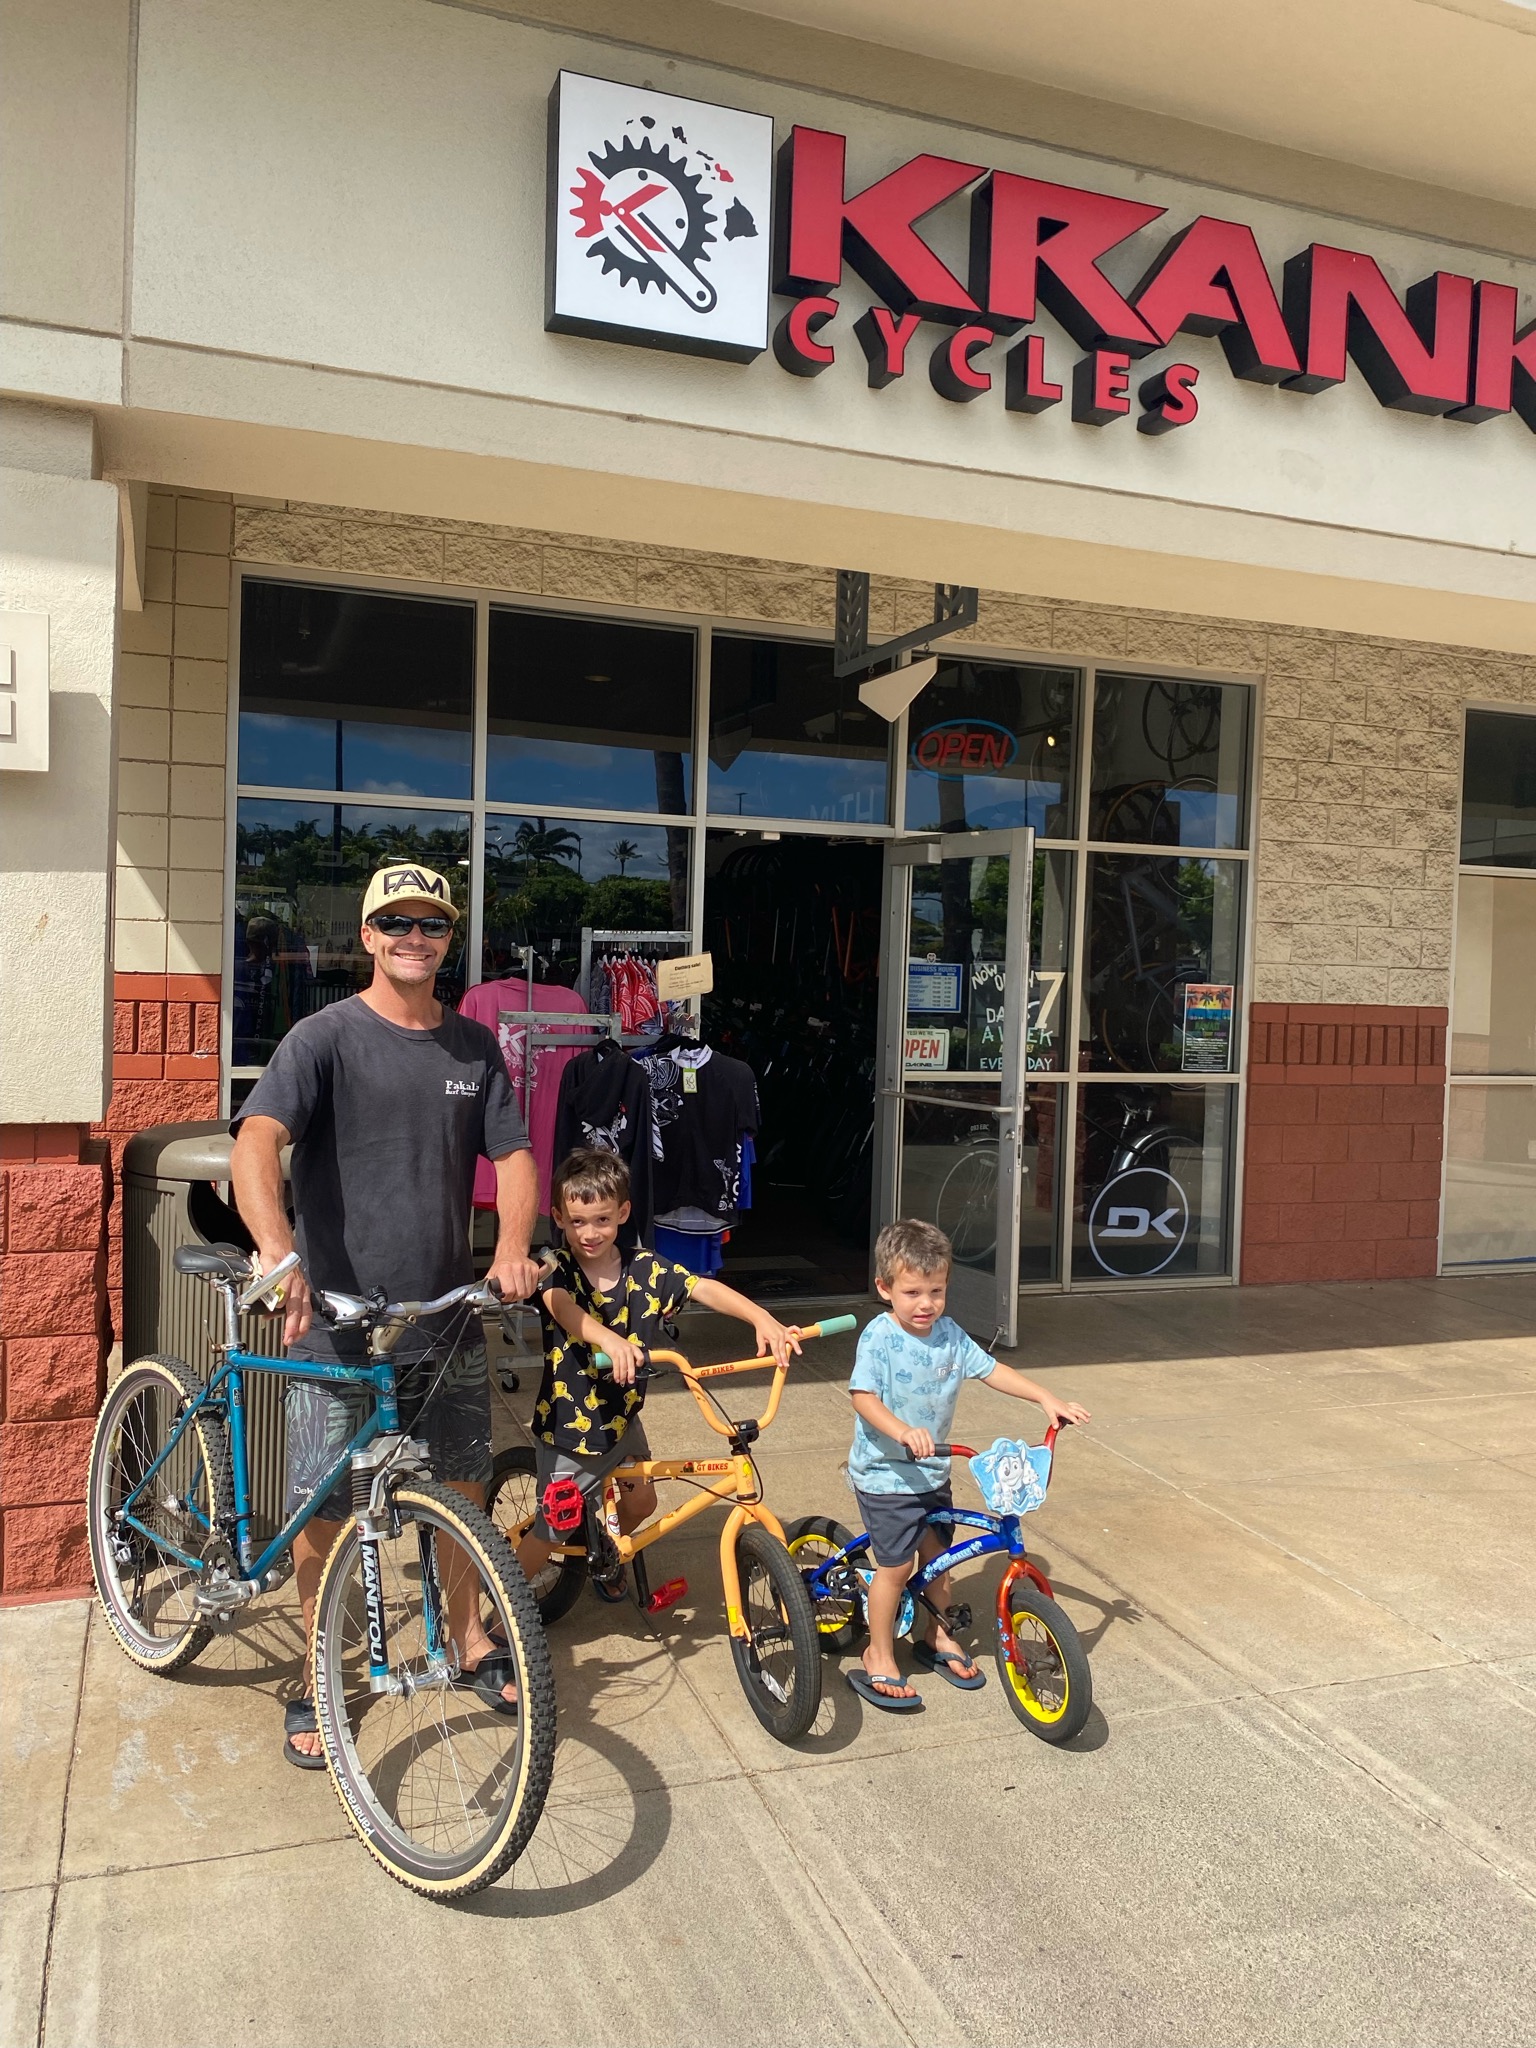 A West Maui Cycles employee and kids with bikes donated by  Krank Cycles.